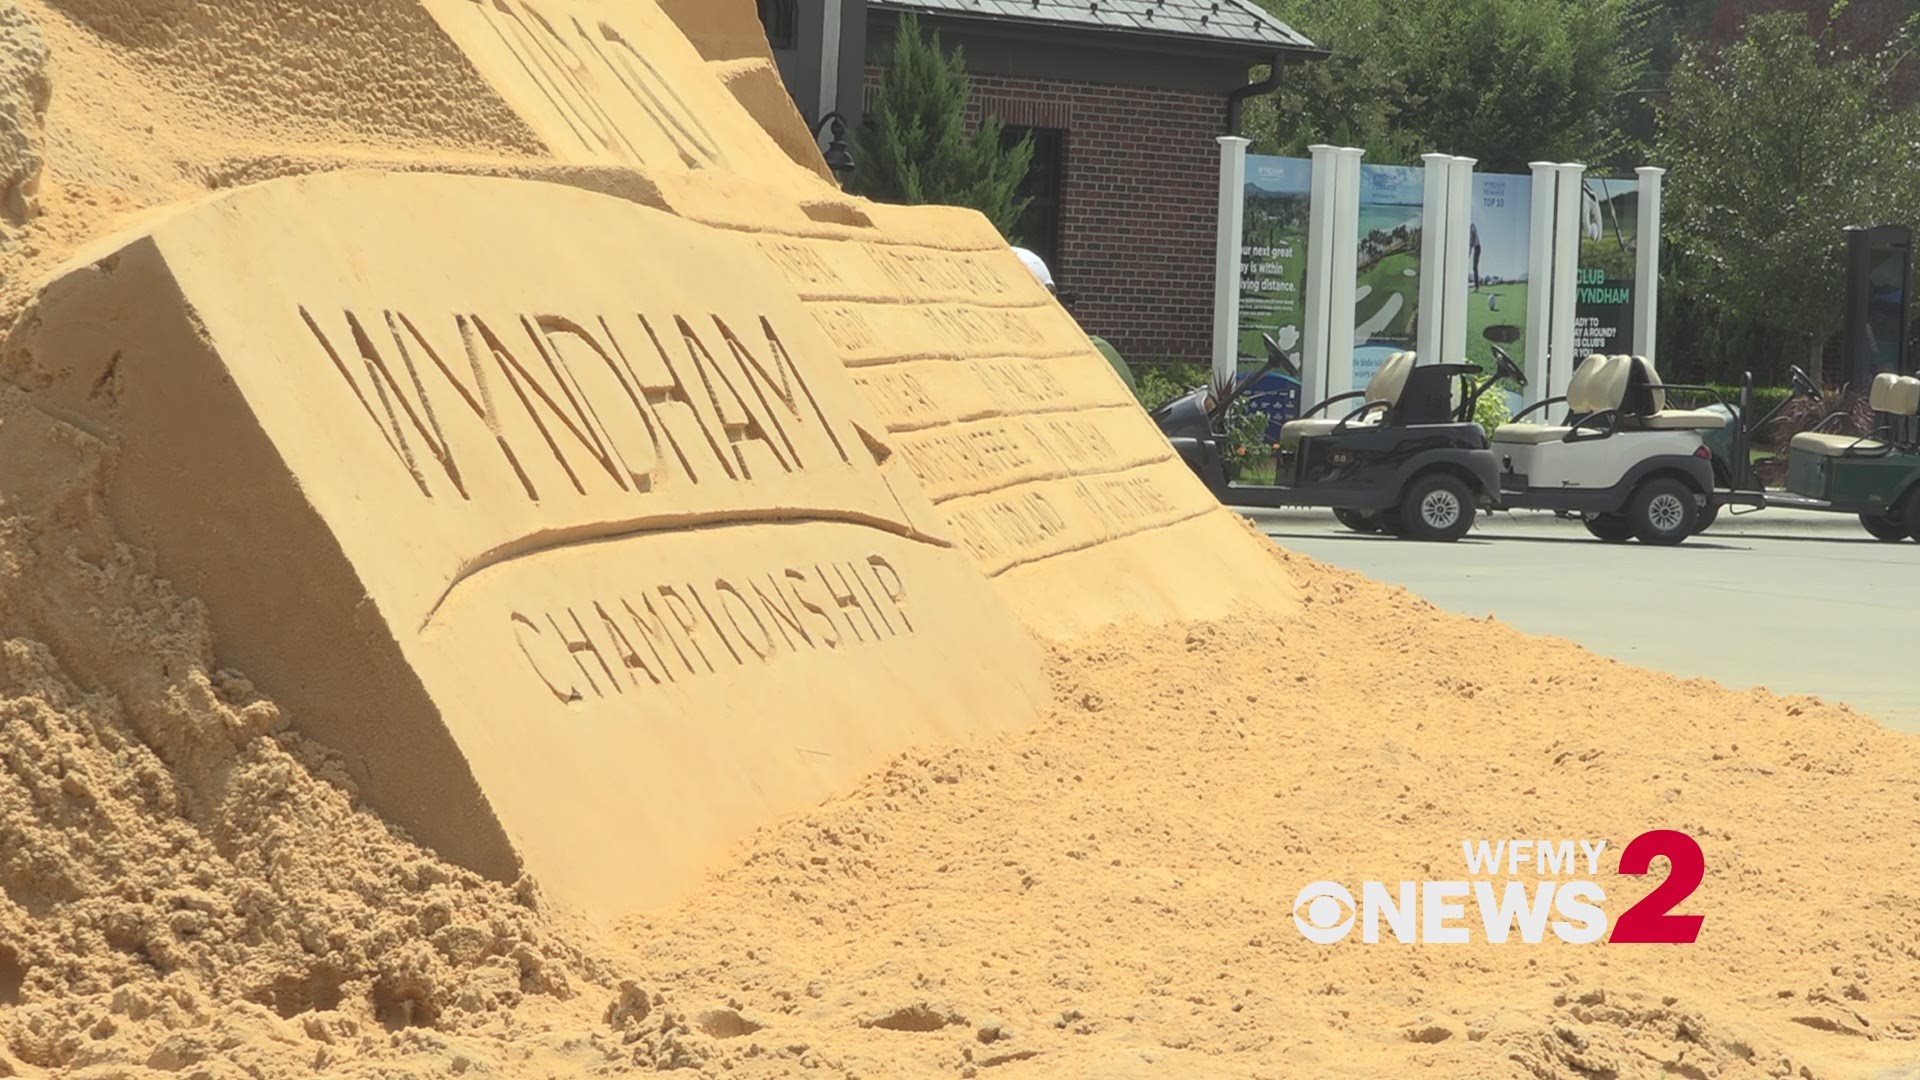 Fans will do anything to keep cool at the Wyndham Championship